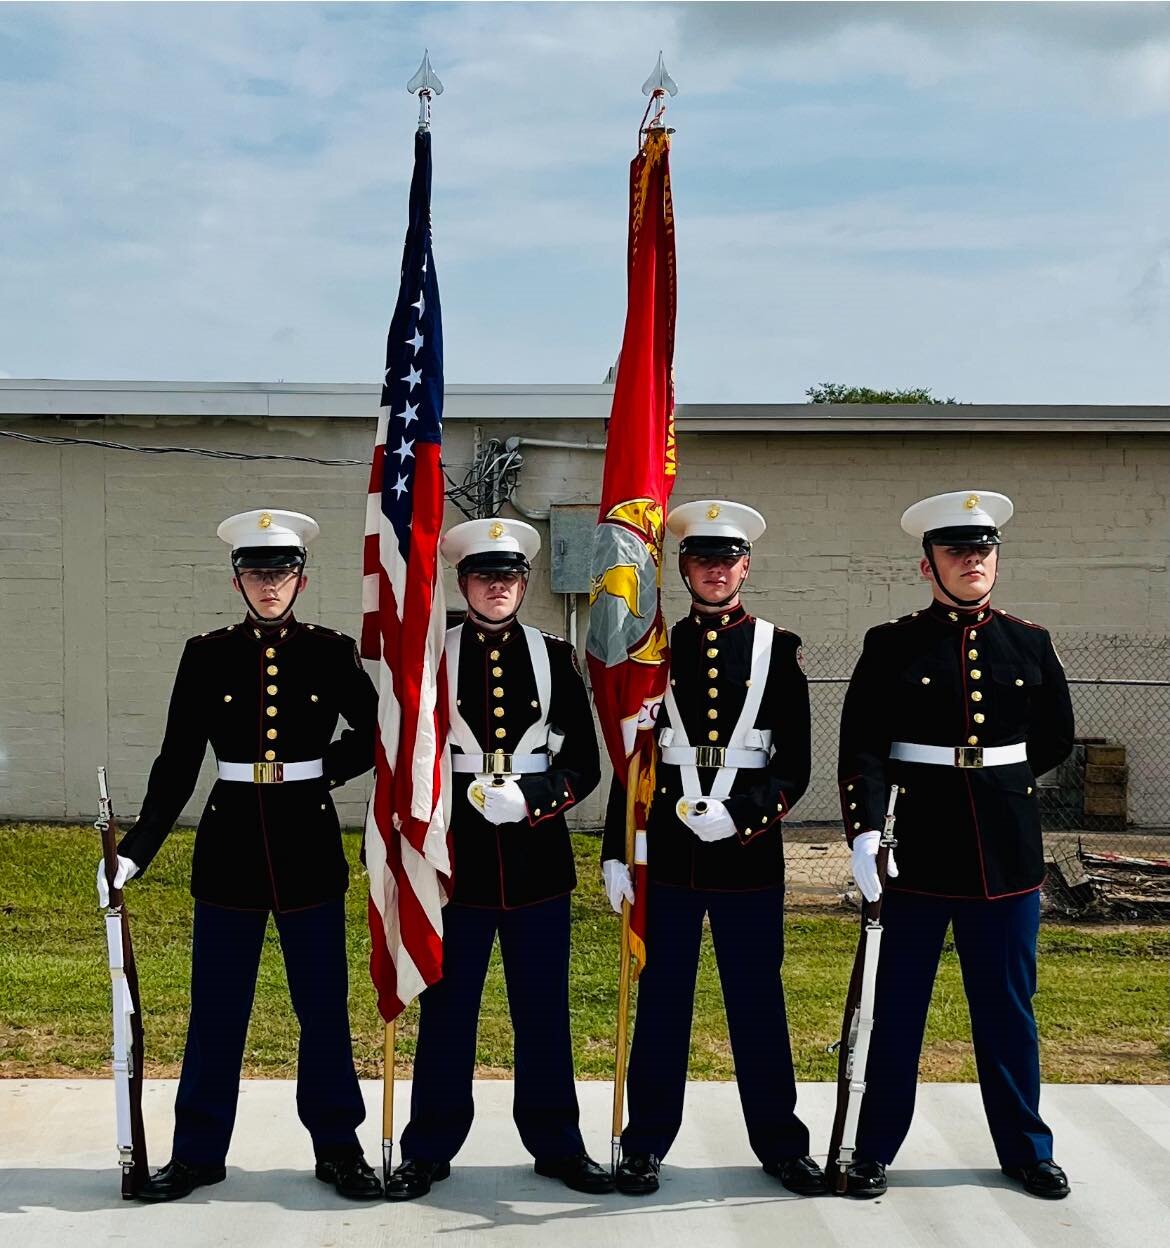 The Royal High School Marine Corps Junior ROTC was part of the Memorial Day remembrance in Brookshire.